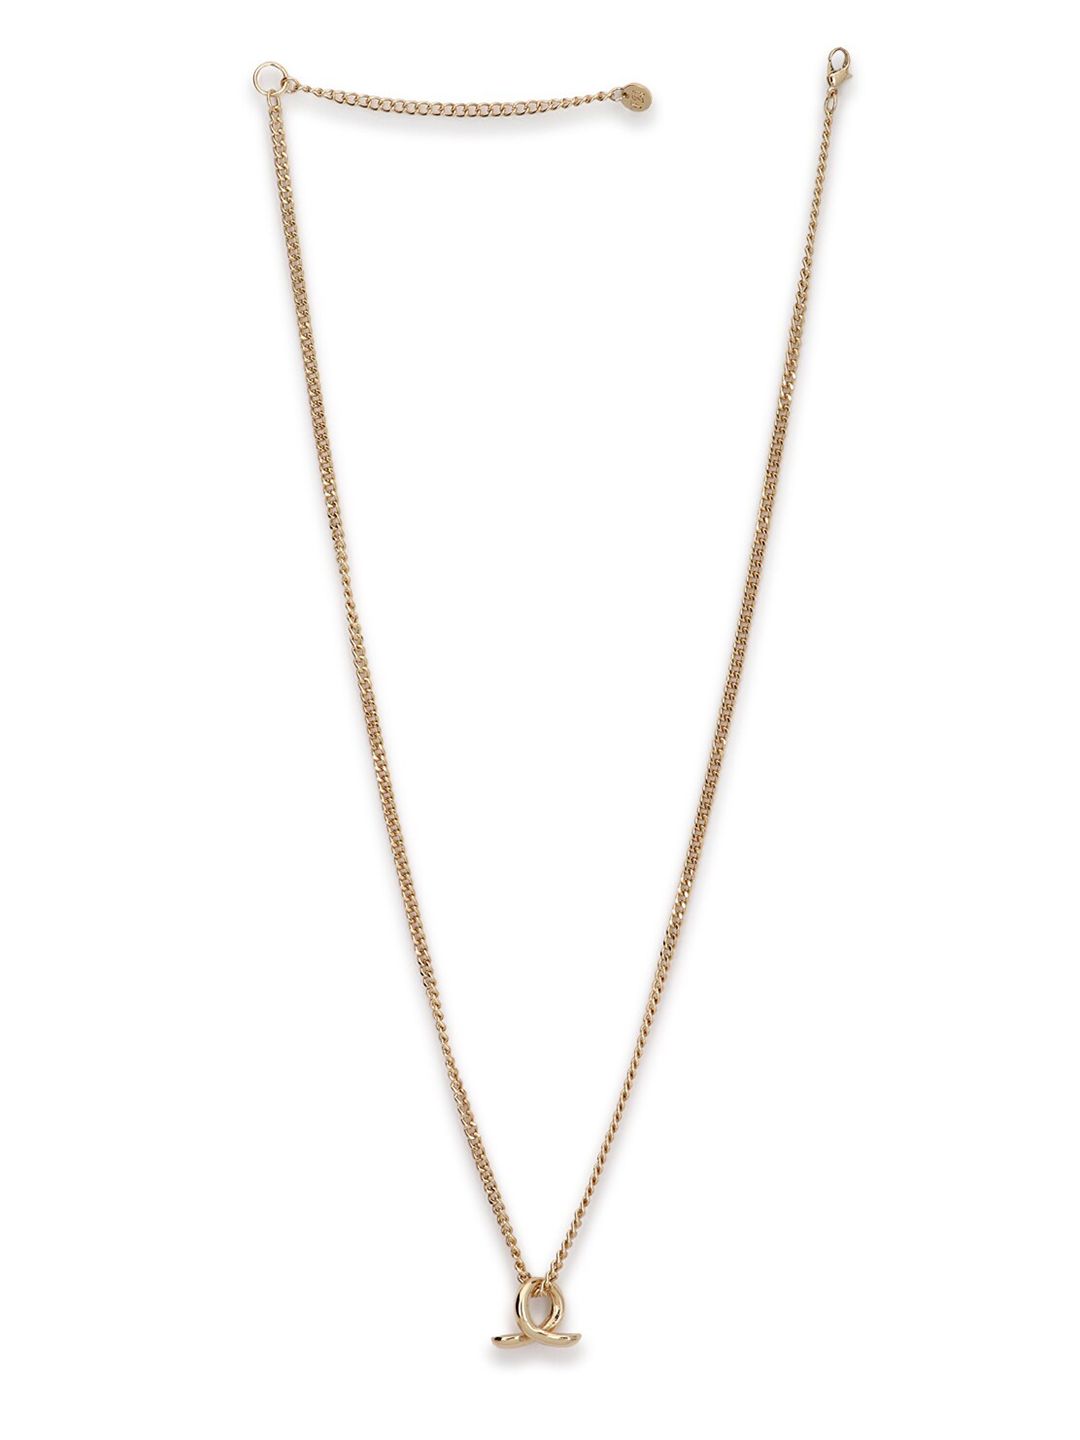 FOREVER 21 Gold-Toned Charm Necklace Price in India